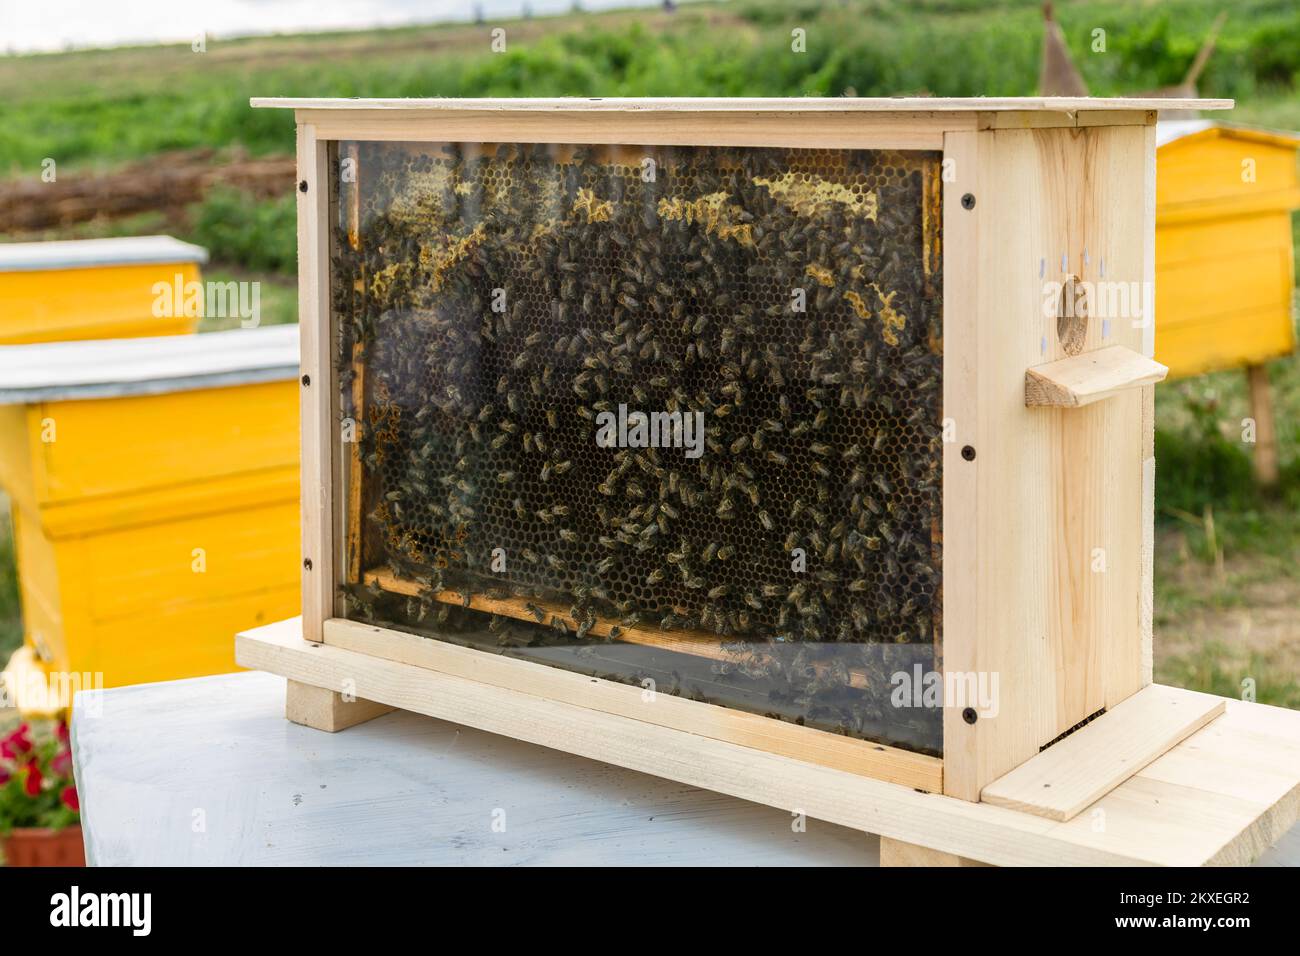 https://c8.alamy.com/comp/2KXEGR2/honey-bees-honey-bee-hive-with-comb-honey-and-wax-in-a-display-behind-glass-2KXEGR2.jpg